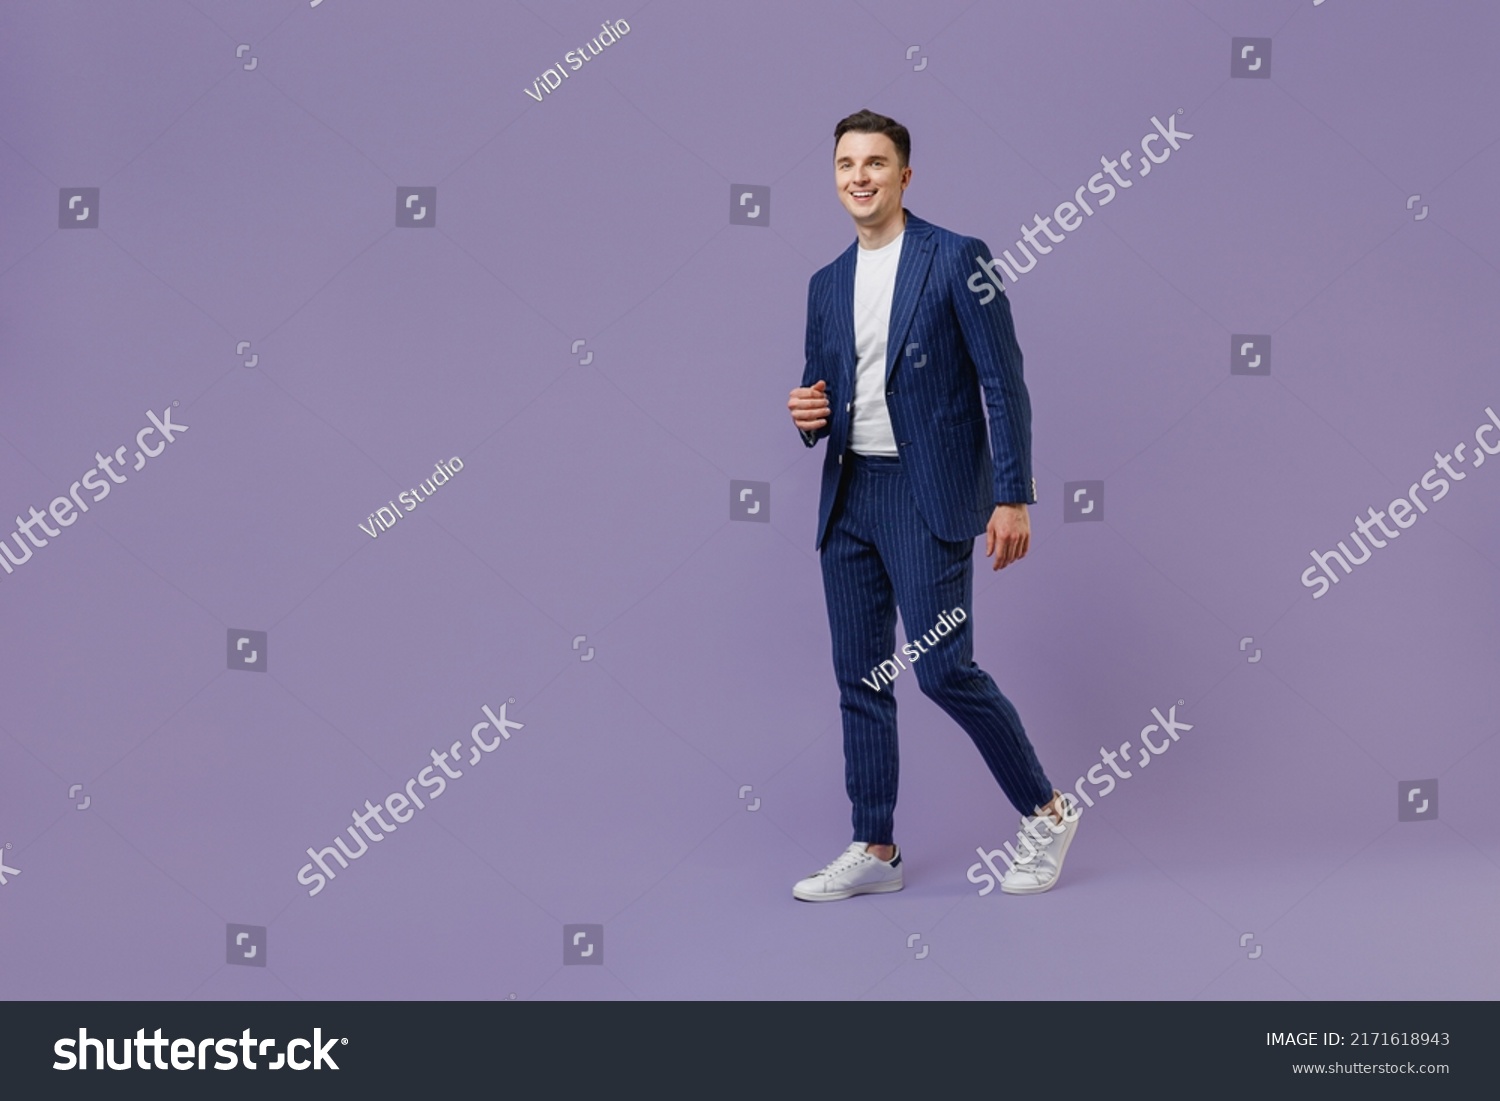 Full size body length young successful employee business man lawyer 20s wear formal blue suit white t-shirt work in office move stroll look aside isolated on pastel purple background studio portrait #2171618943